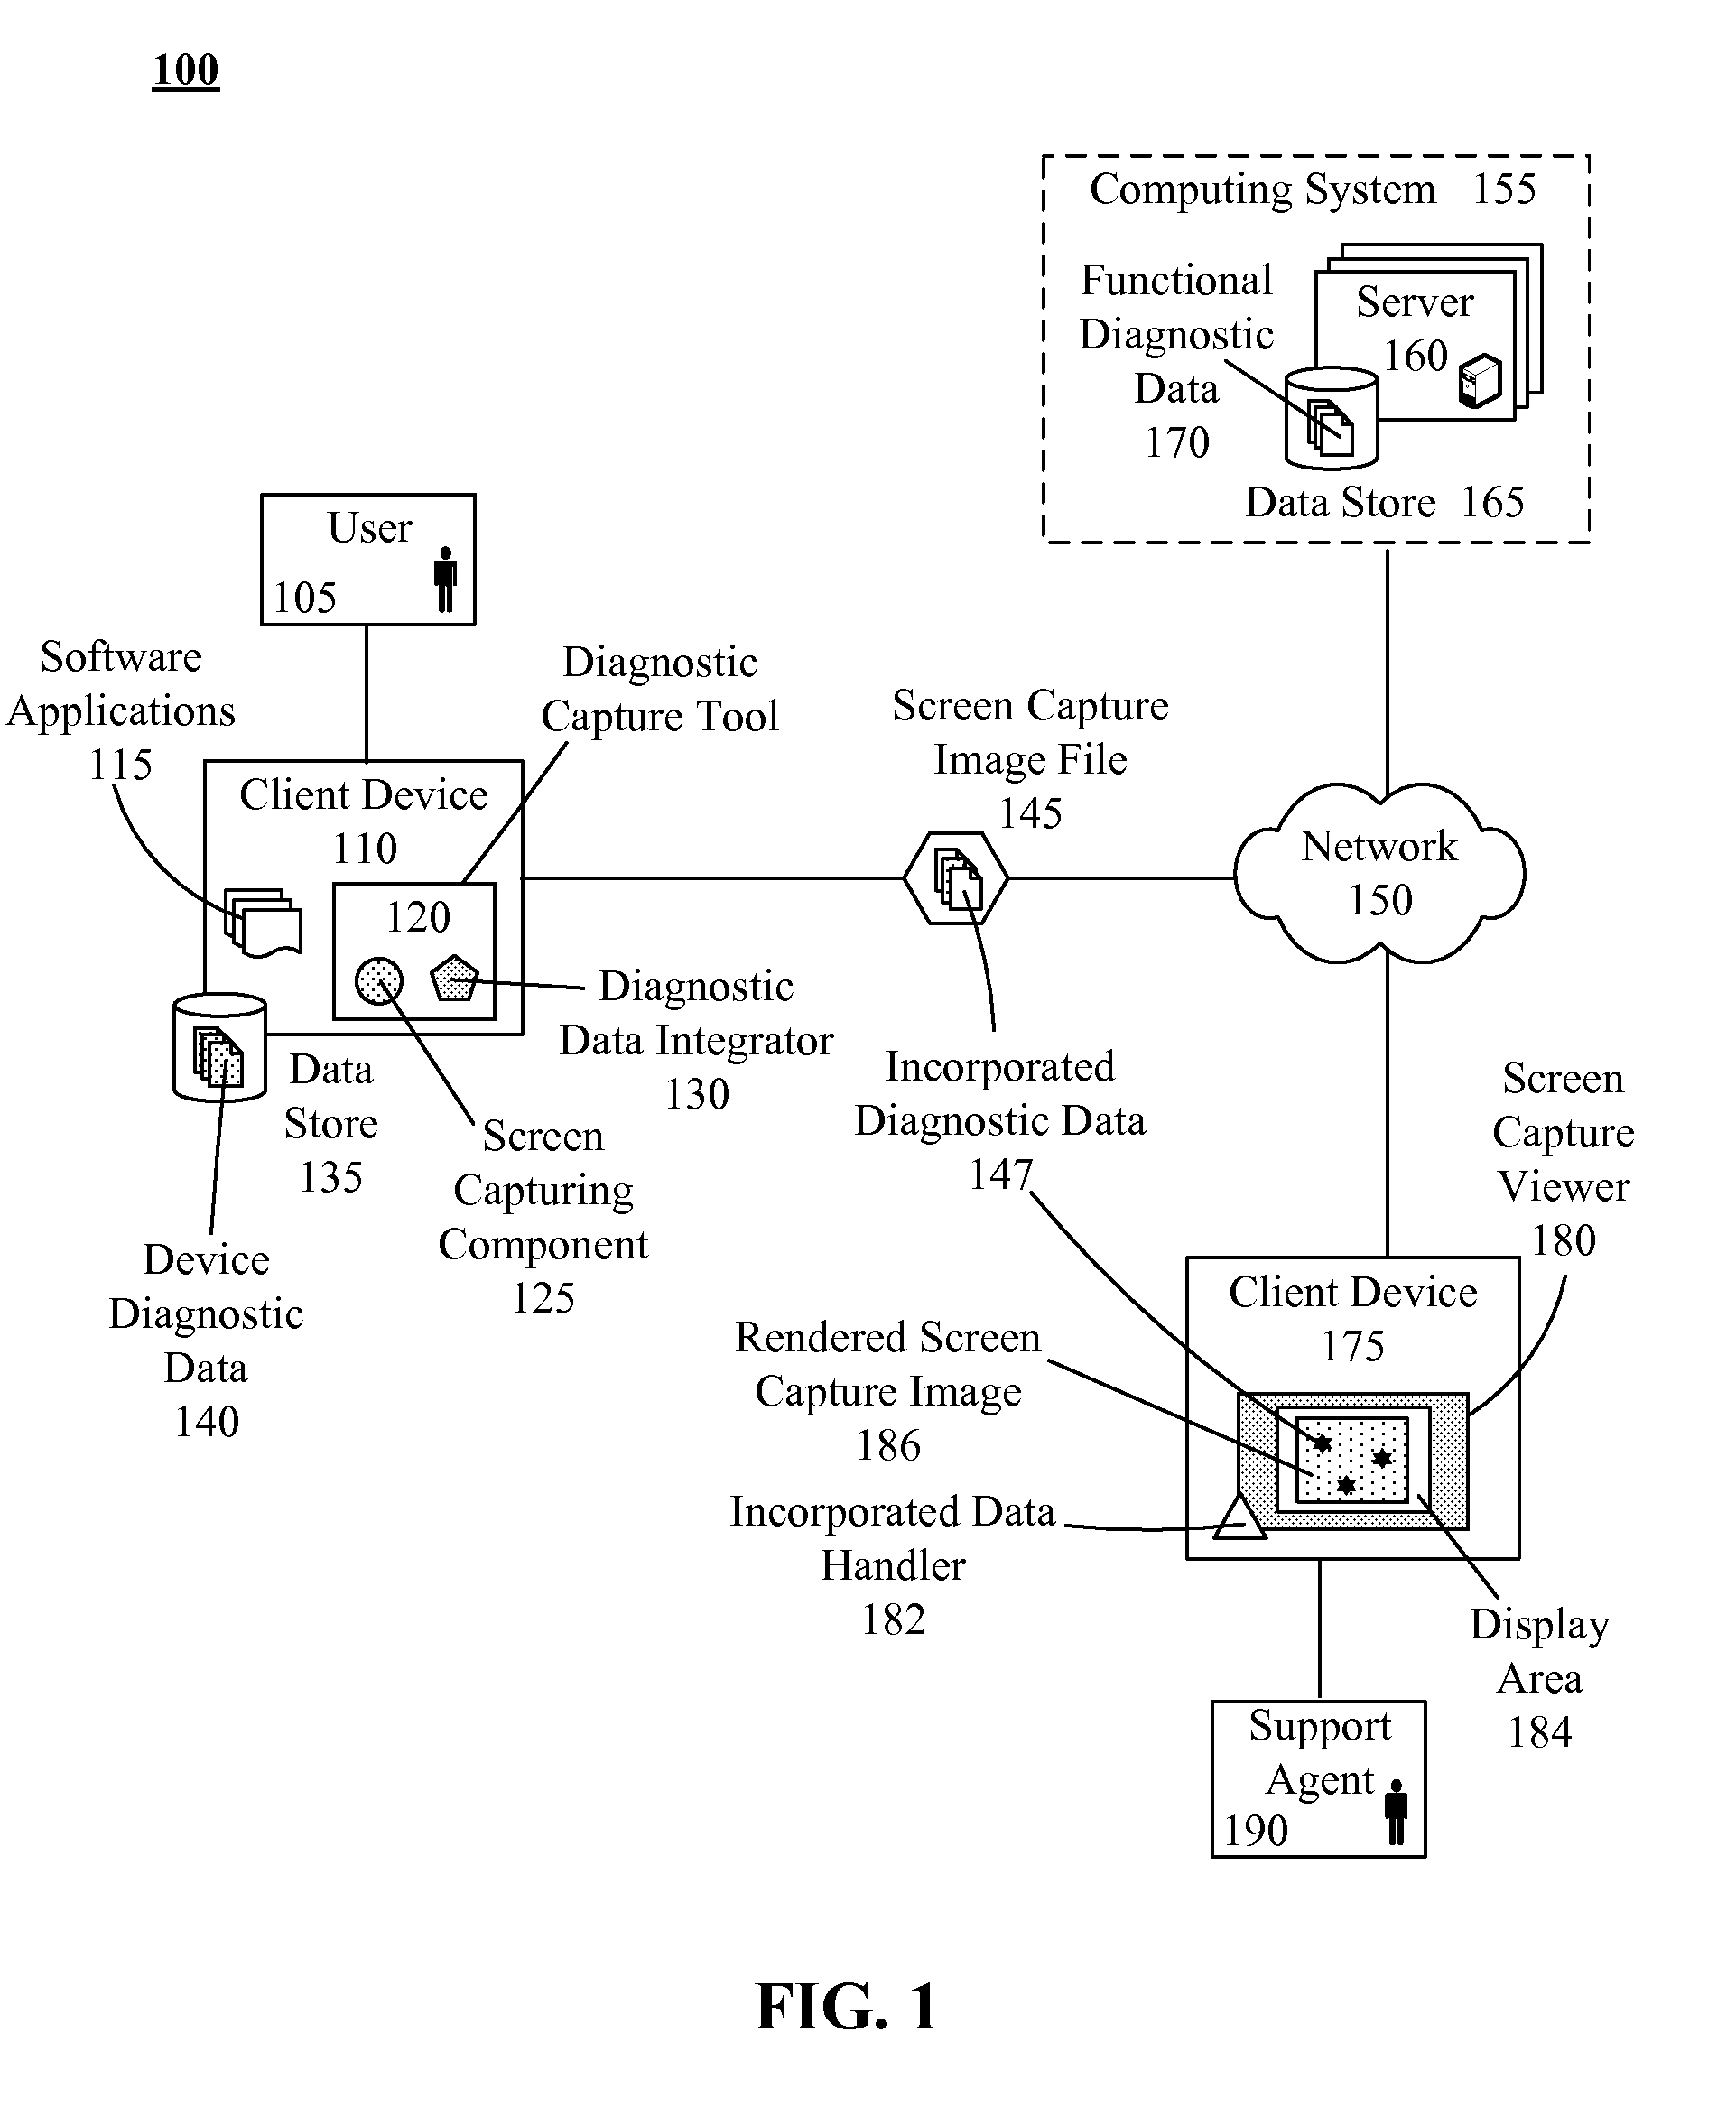 Solution for automatically incorporating diagnostic data within screen capture images